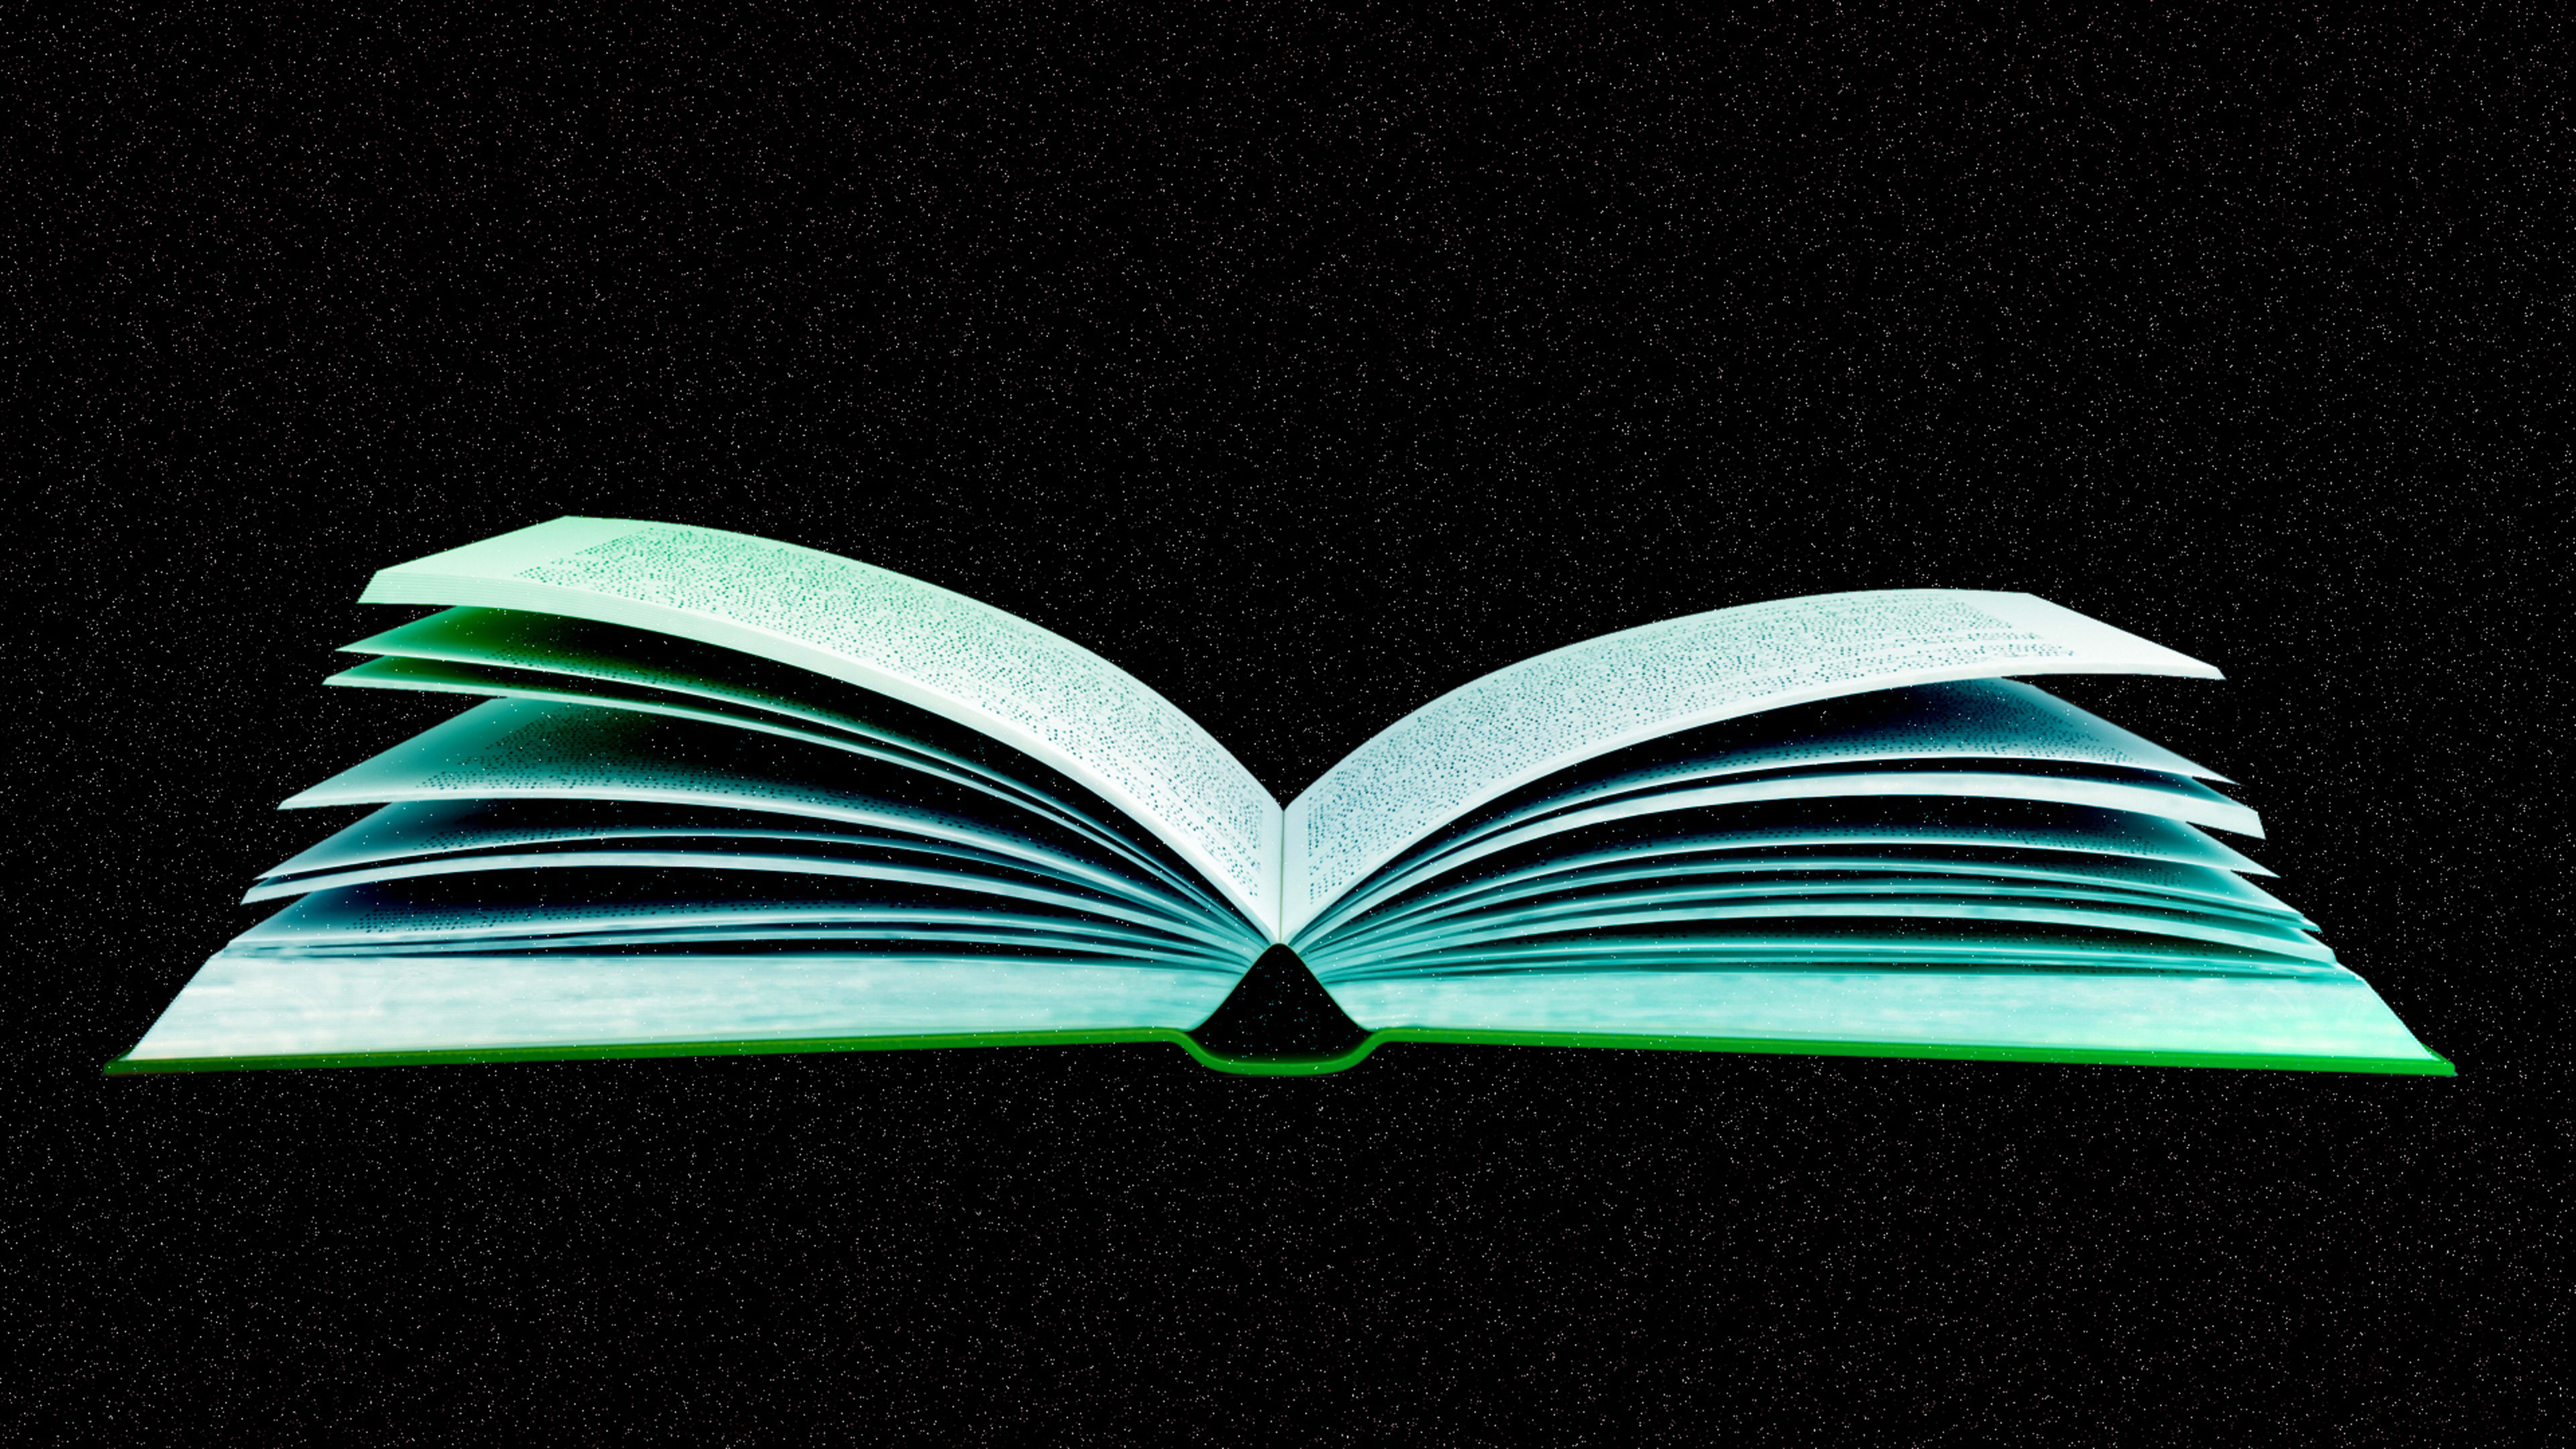 6 must-read books to understand the future, according to YCombinator’s president